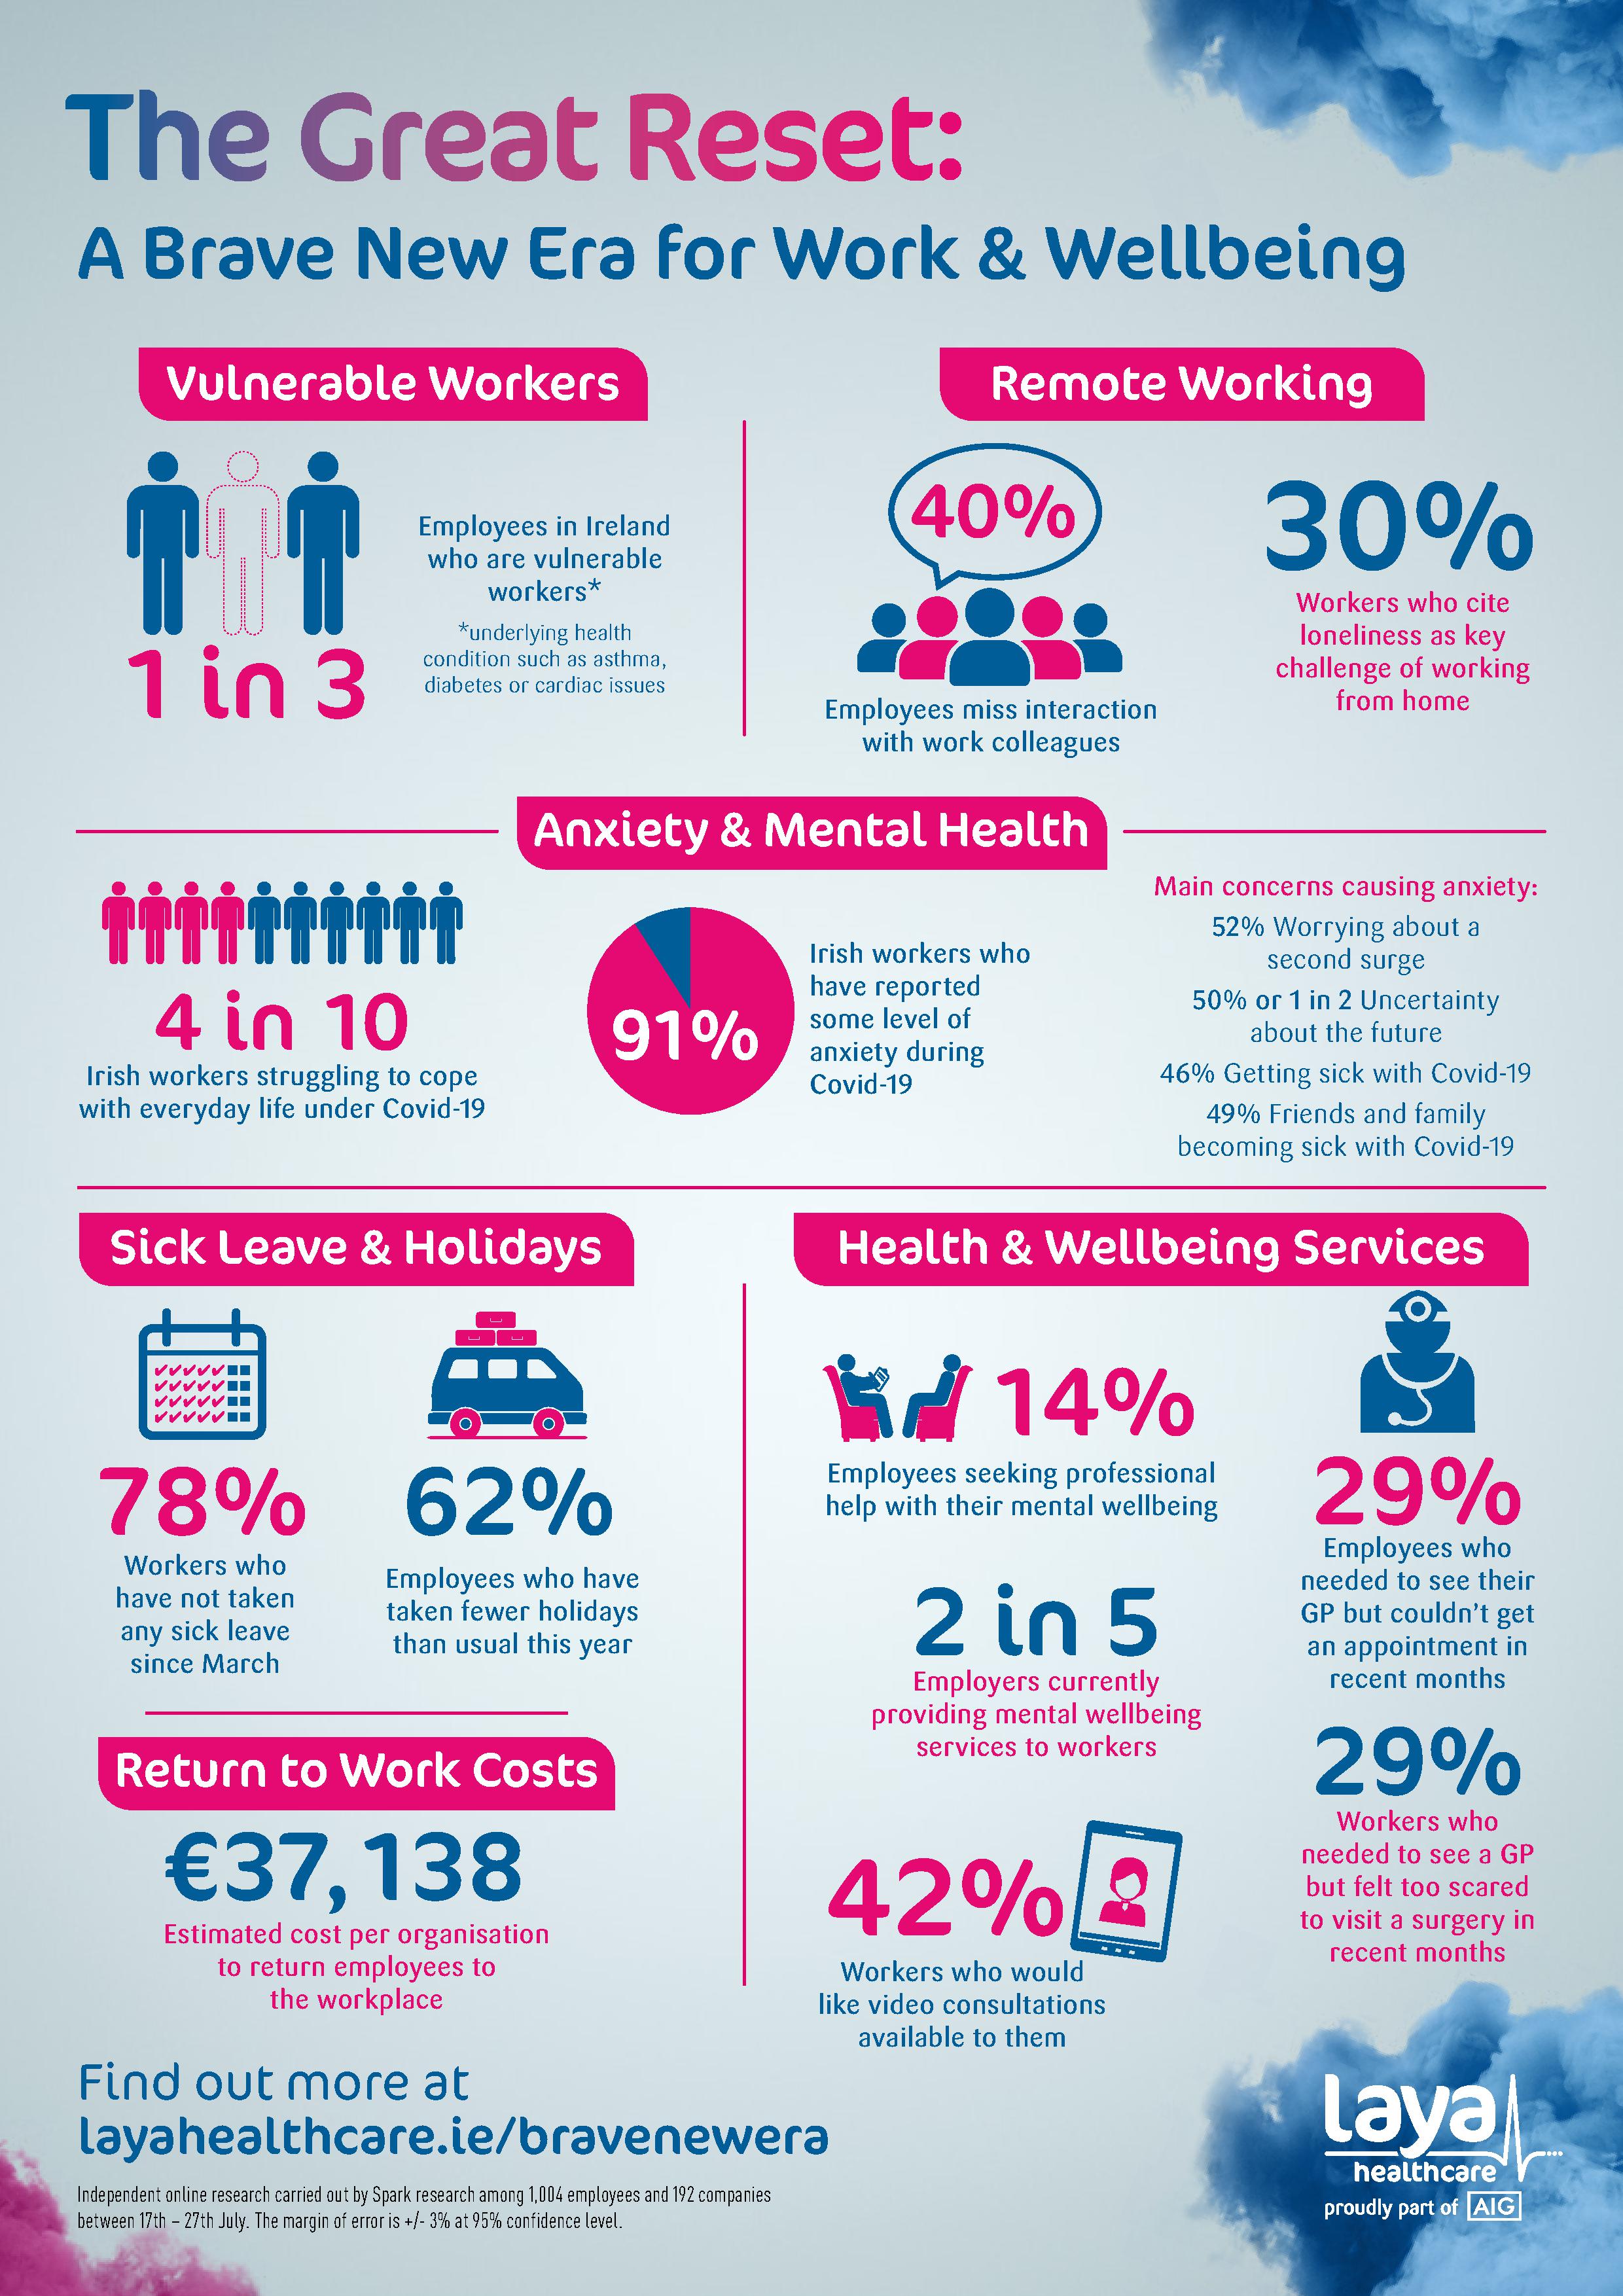 A Laya Healthcare infographic showing statistics on the impact of Covid-19 on mental health in Ireland.